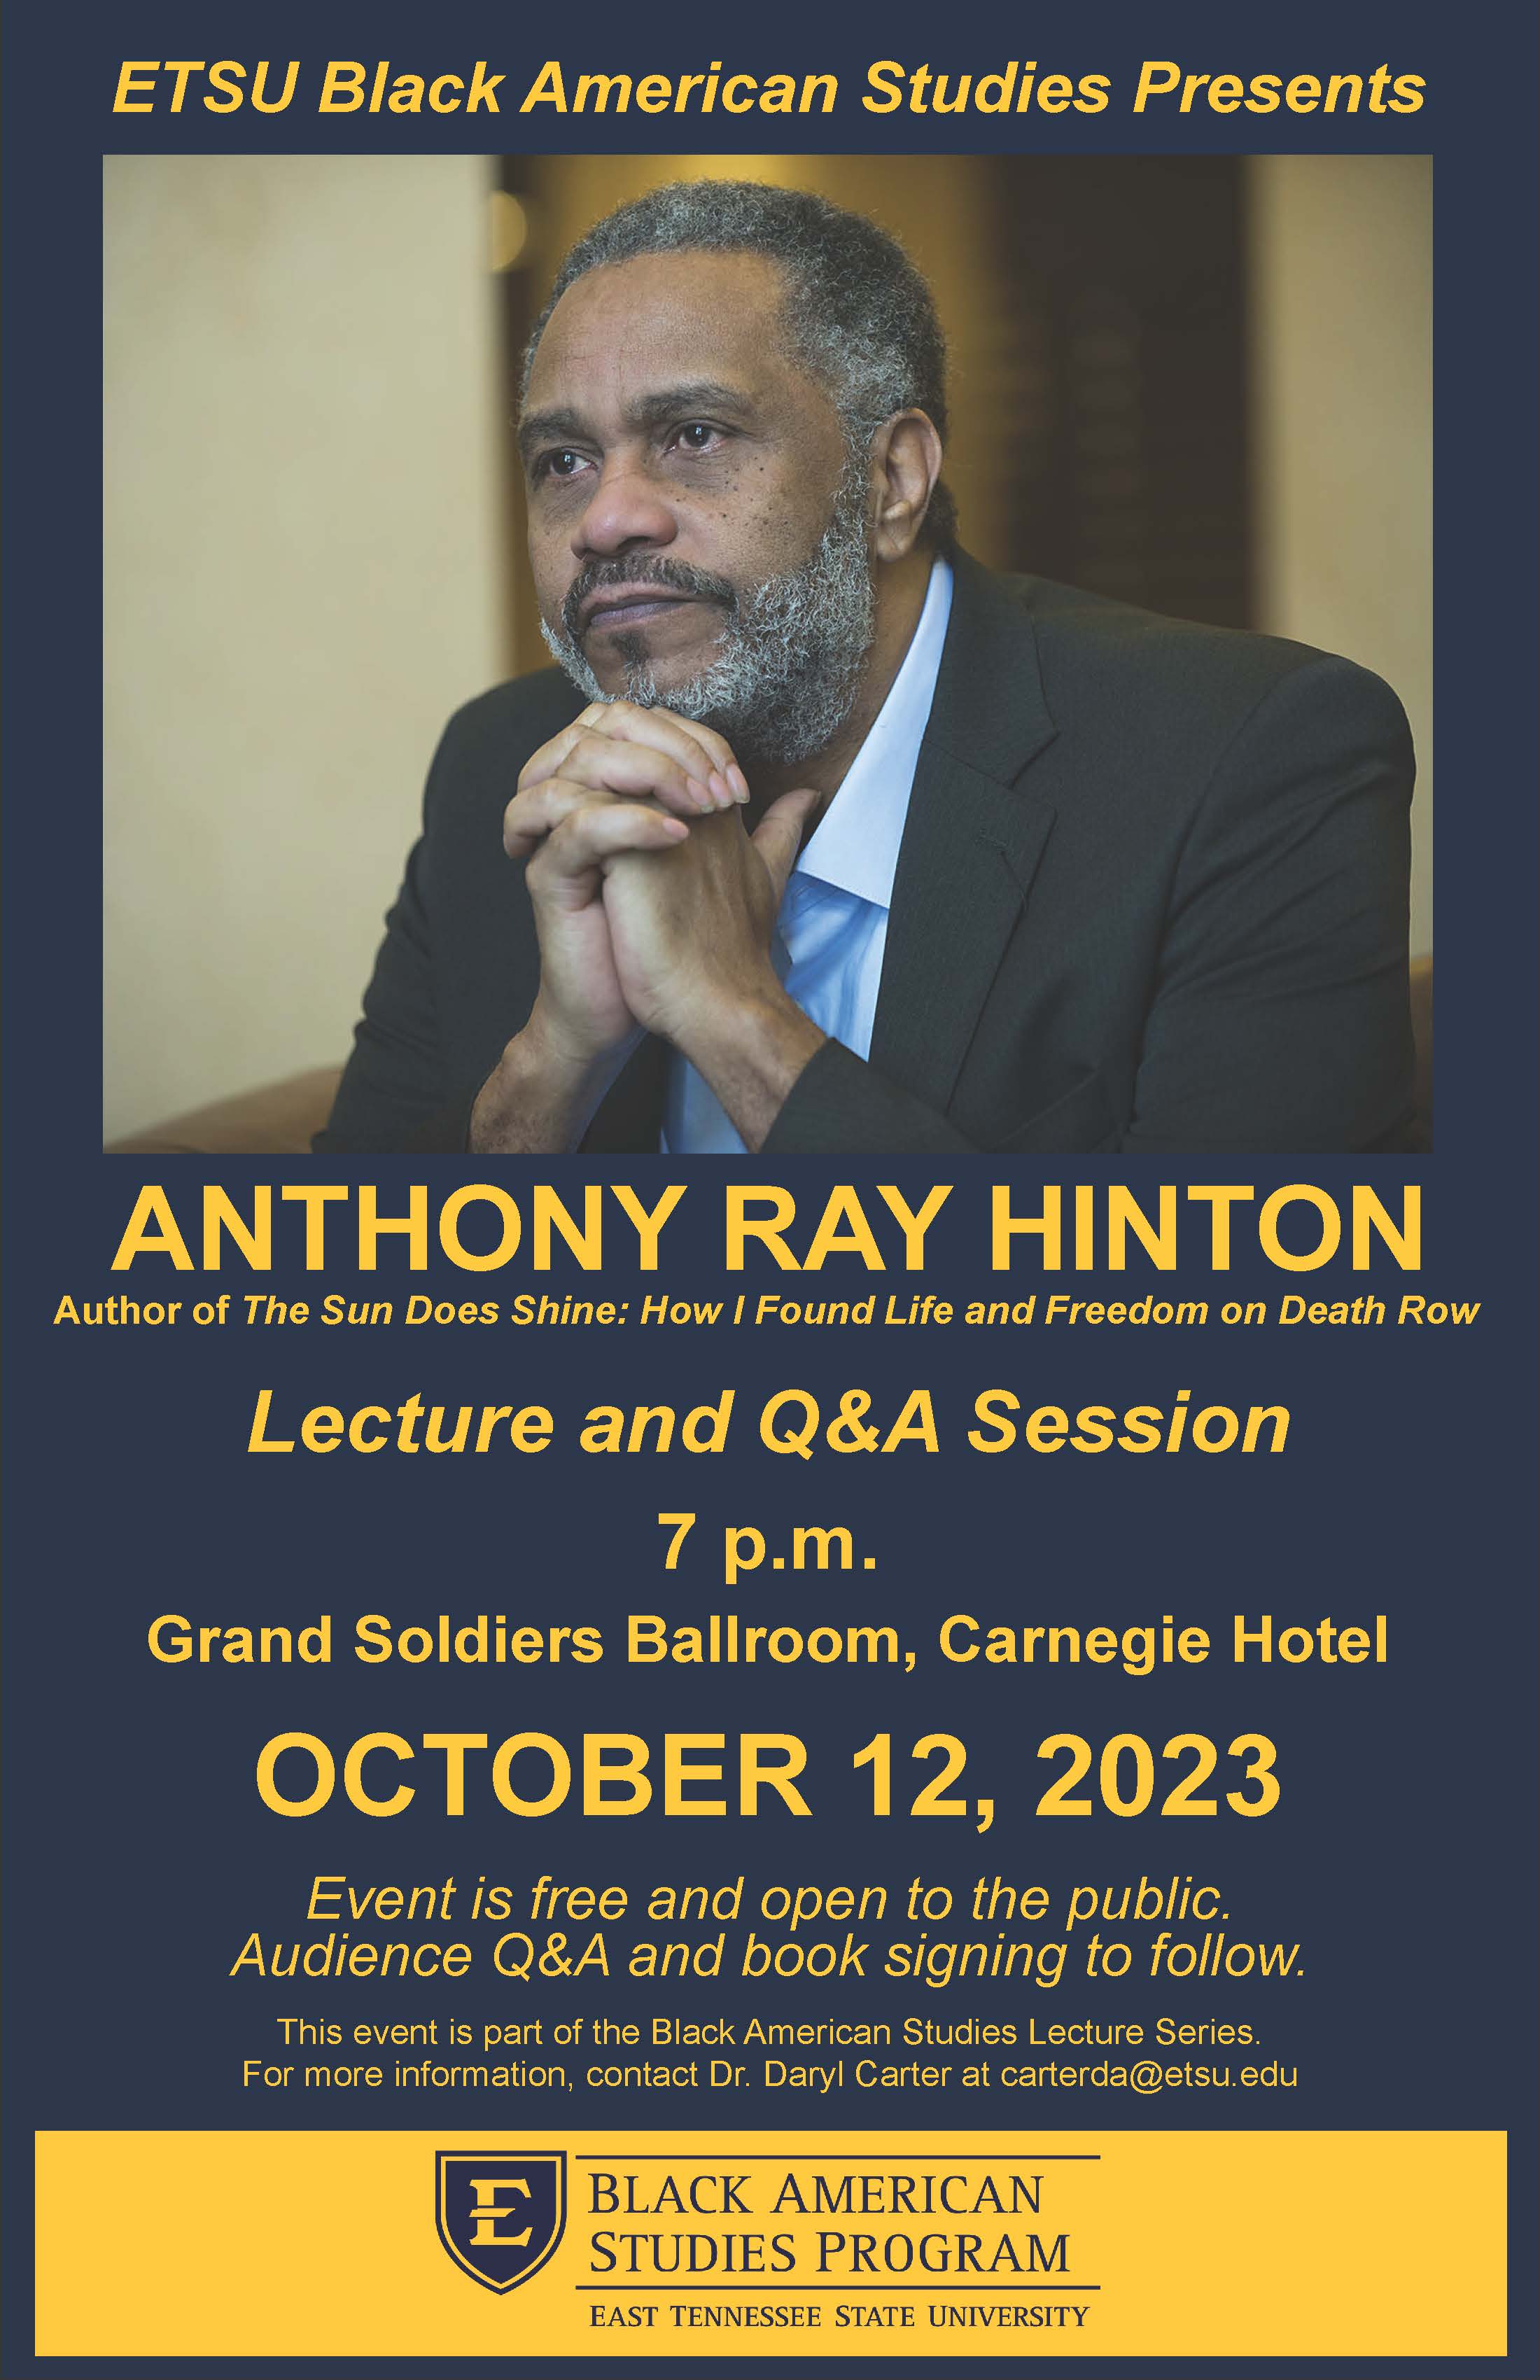 Anthony Hinton flyer with event information above.